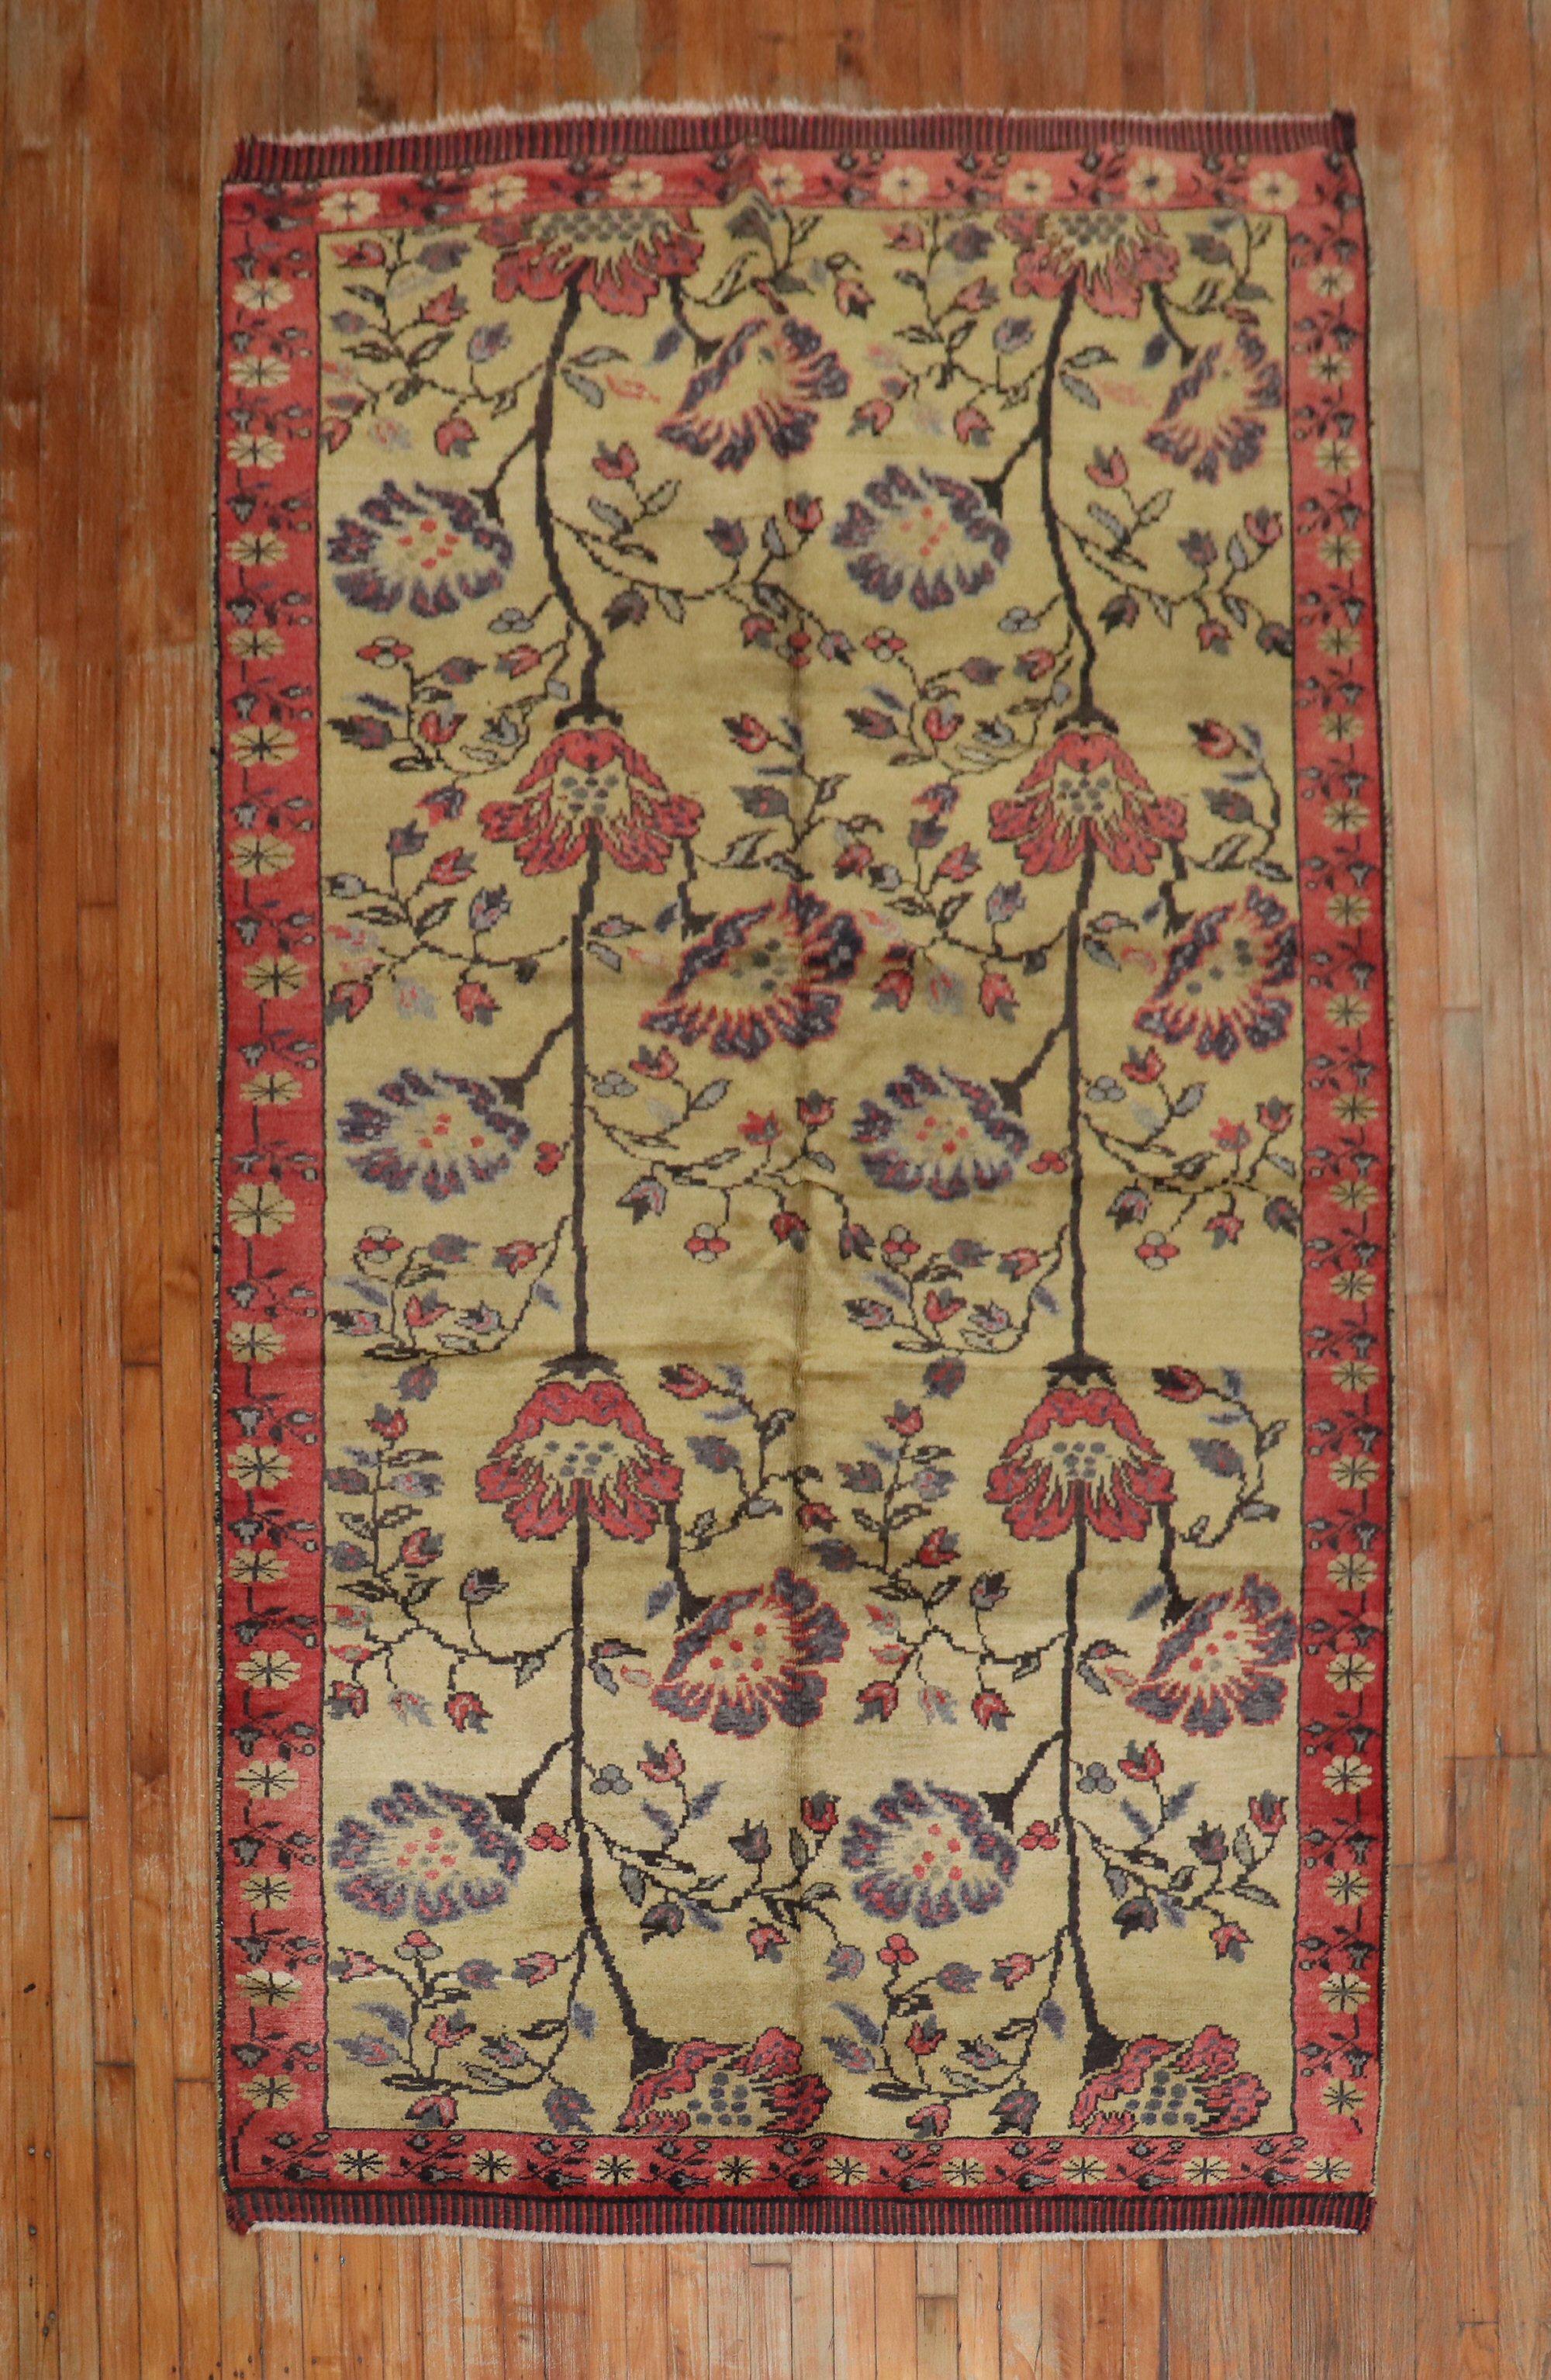 Mid 20th Century Turkish rug with an all-over floral design

Measures: 5'5'' x 10'